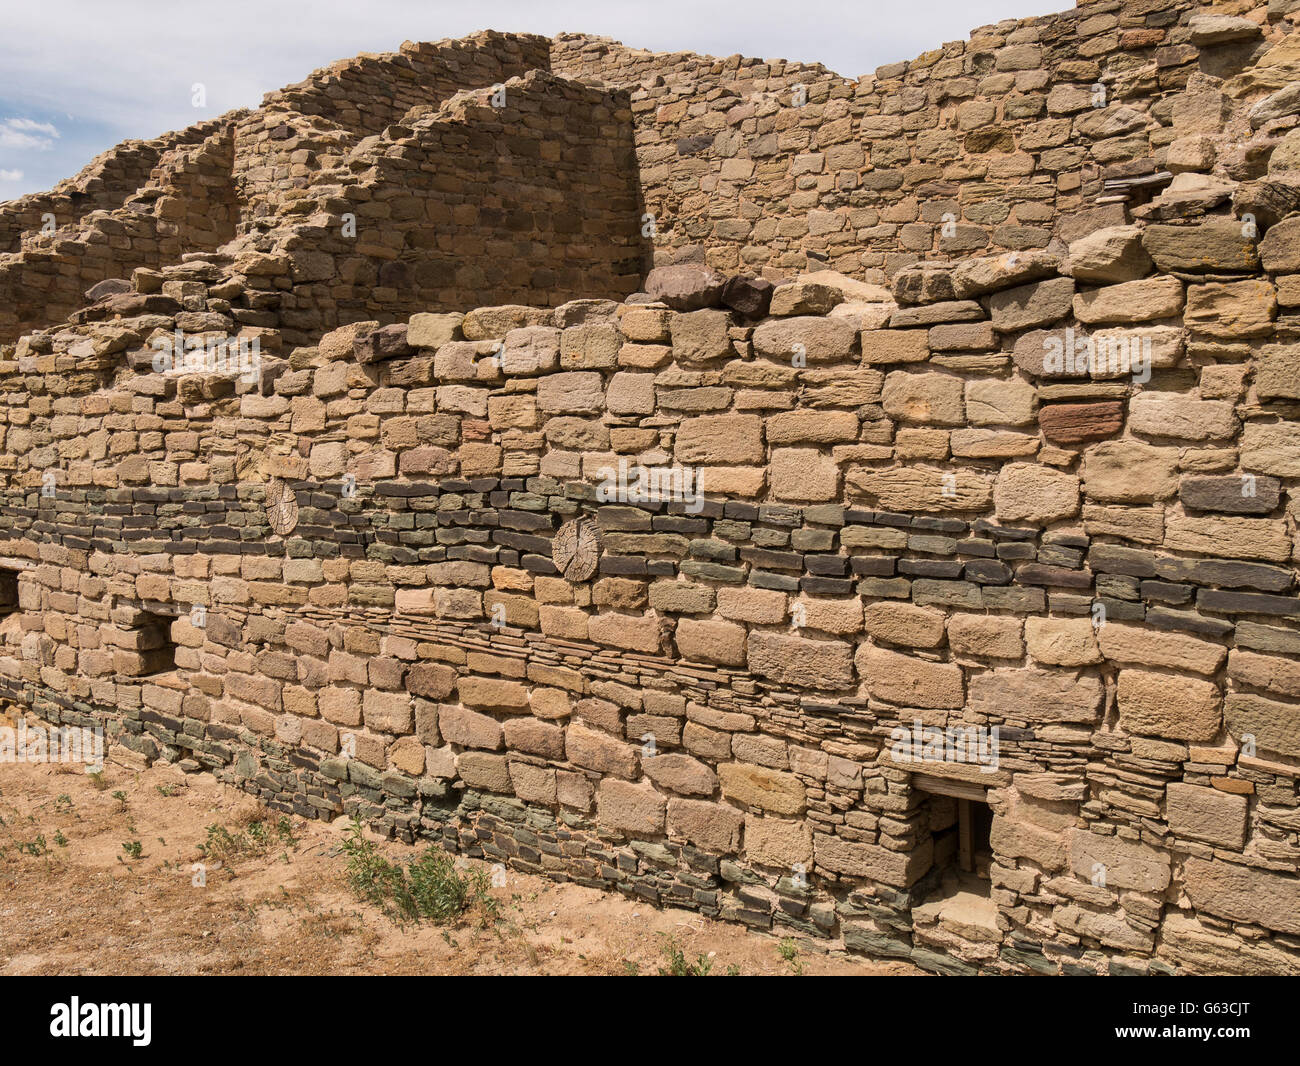 Green striped wall, Aztec Ruins National Monument, Aztec, New Mexico Stock Photo